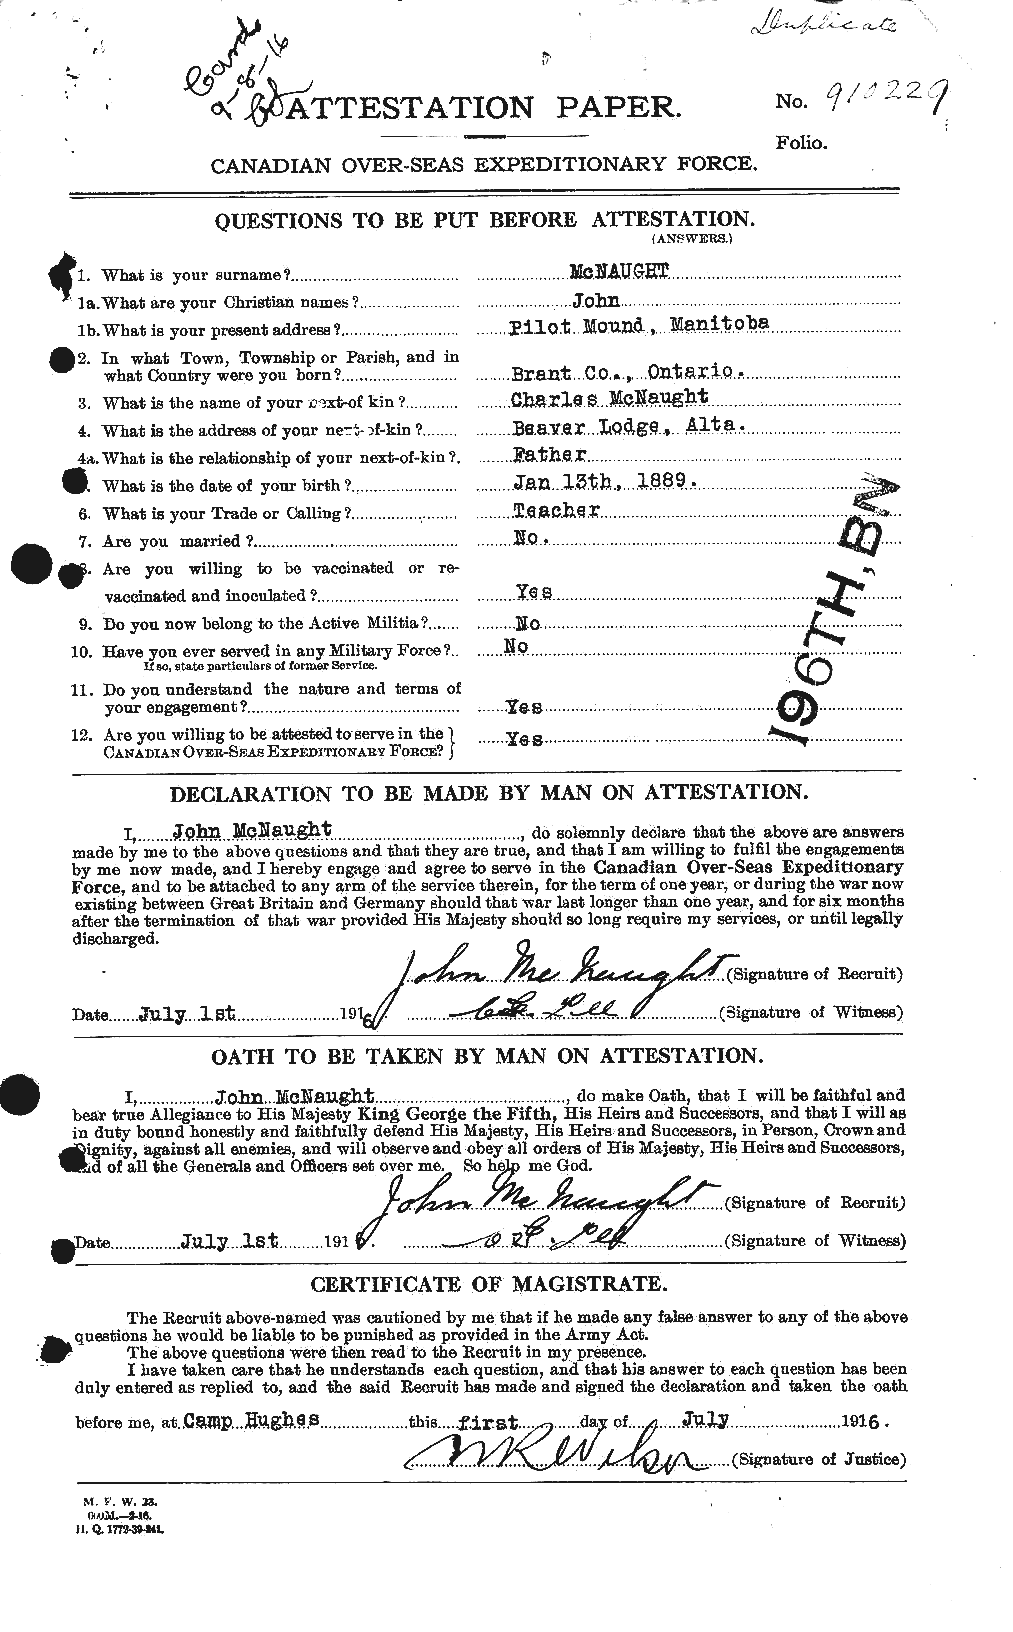 Personnel Records of the First World War - CEF 538368a